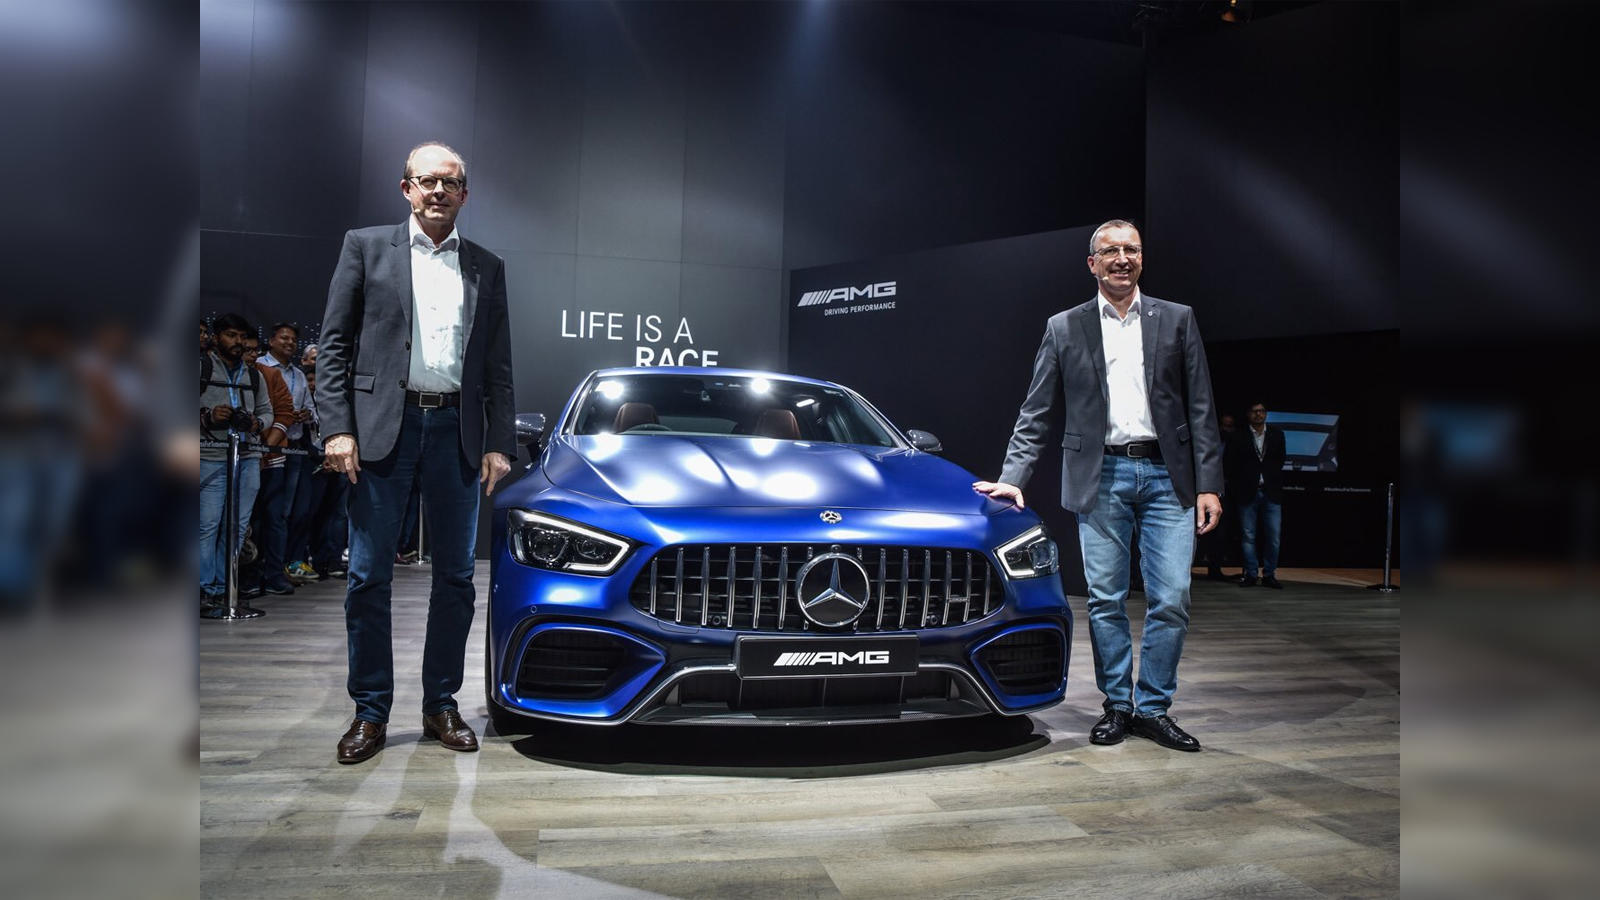 Auto Expo: Mercedes launches AMG GT 63S 4Matic 4-Door Coupe at Rs 2.42 cr -  The Economic Times